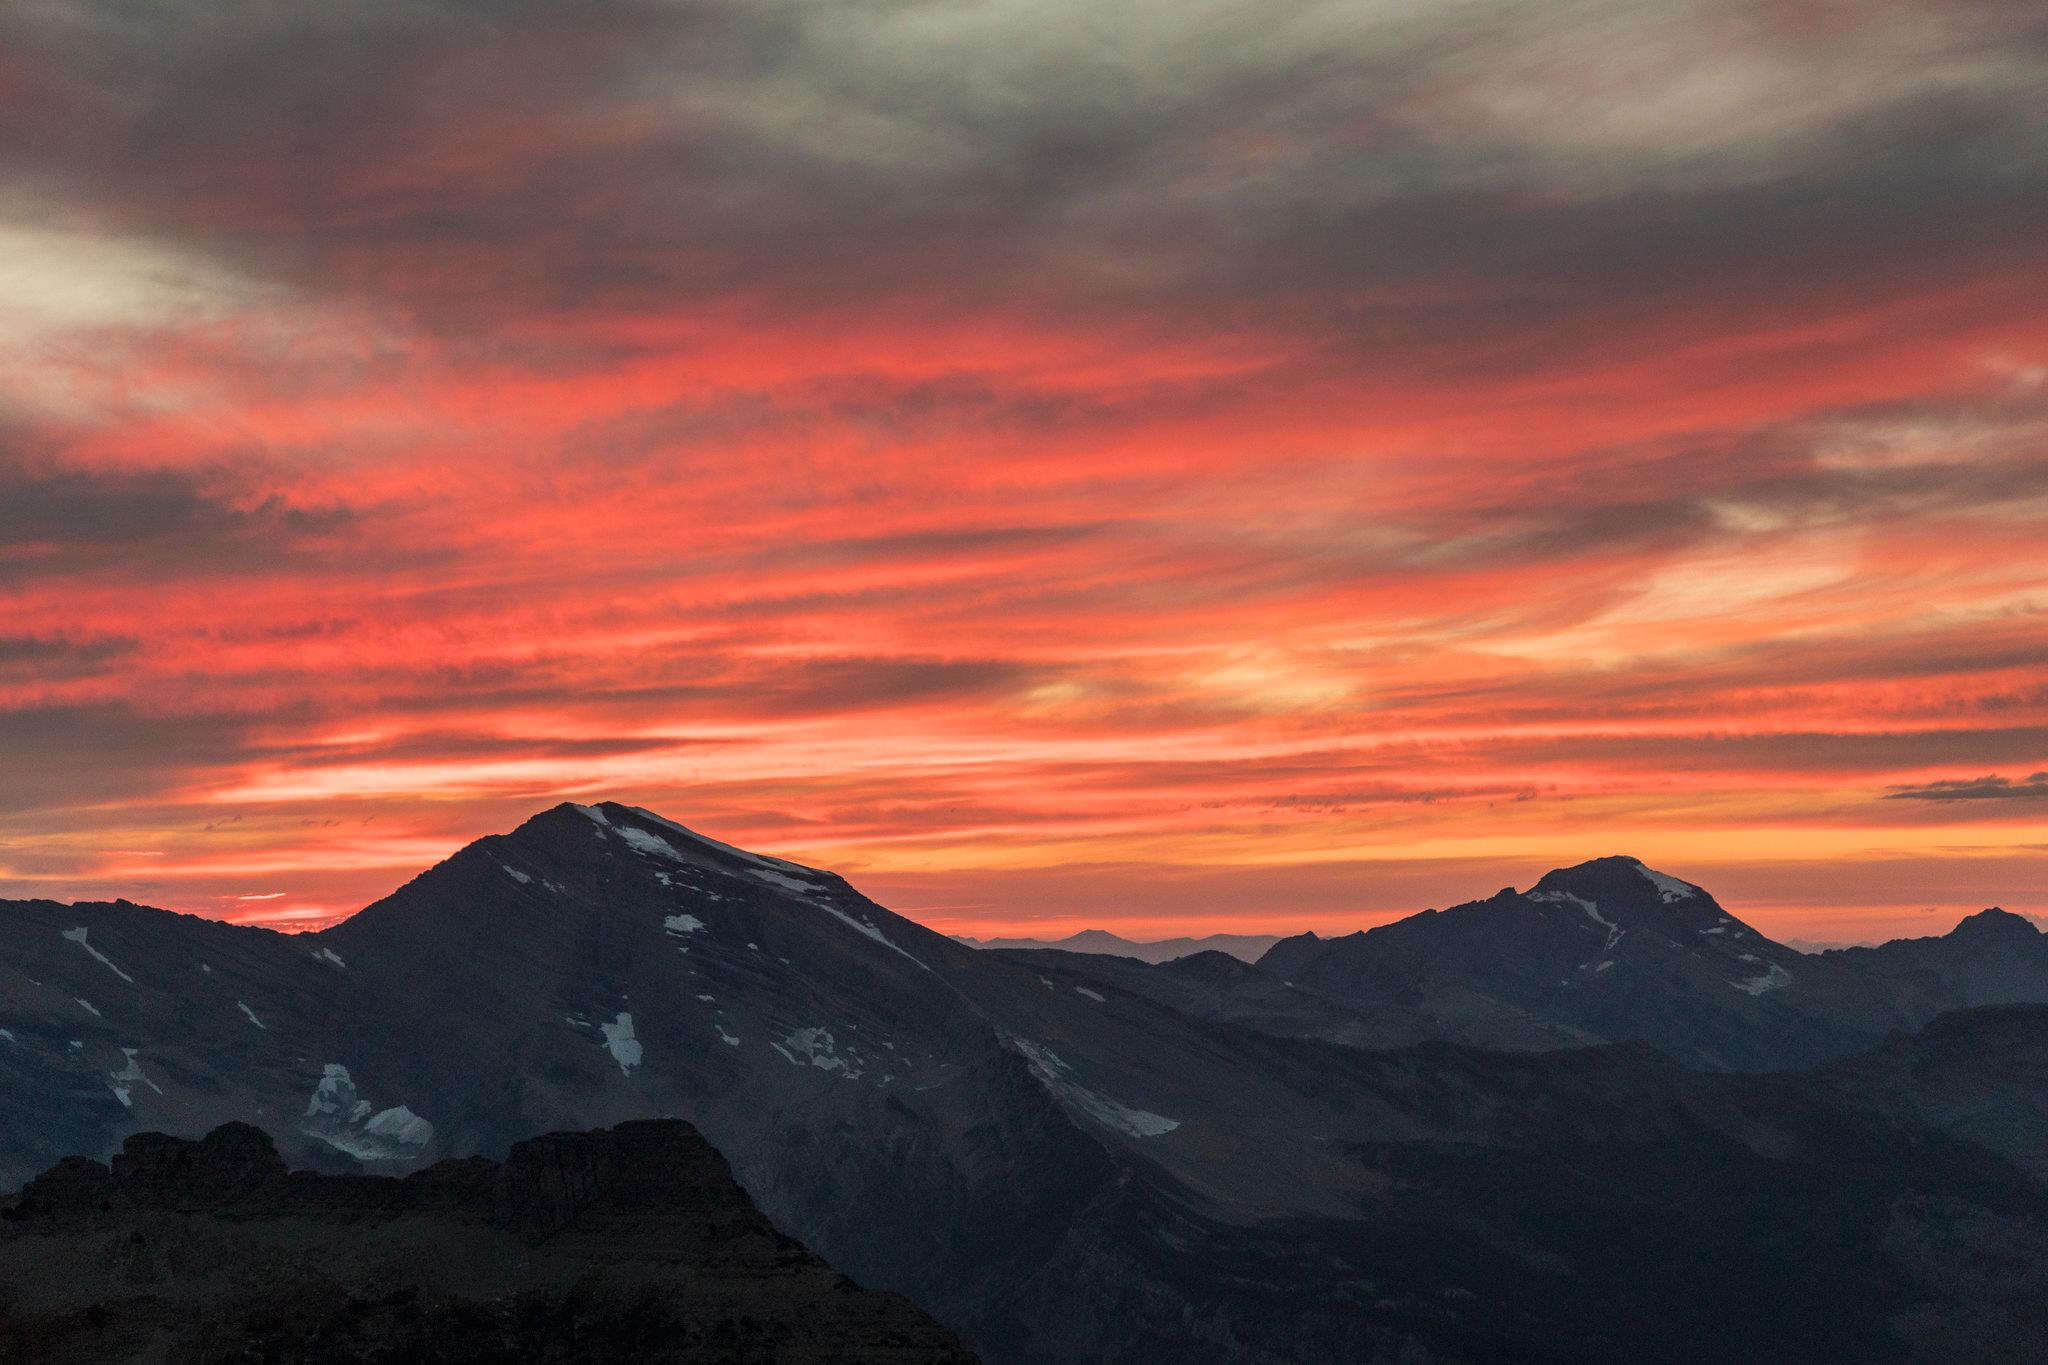 Clouds of orange and red sit above dark-gray mountains; snow dots the mountain peaks.